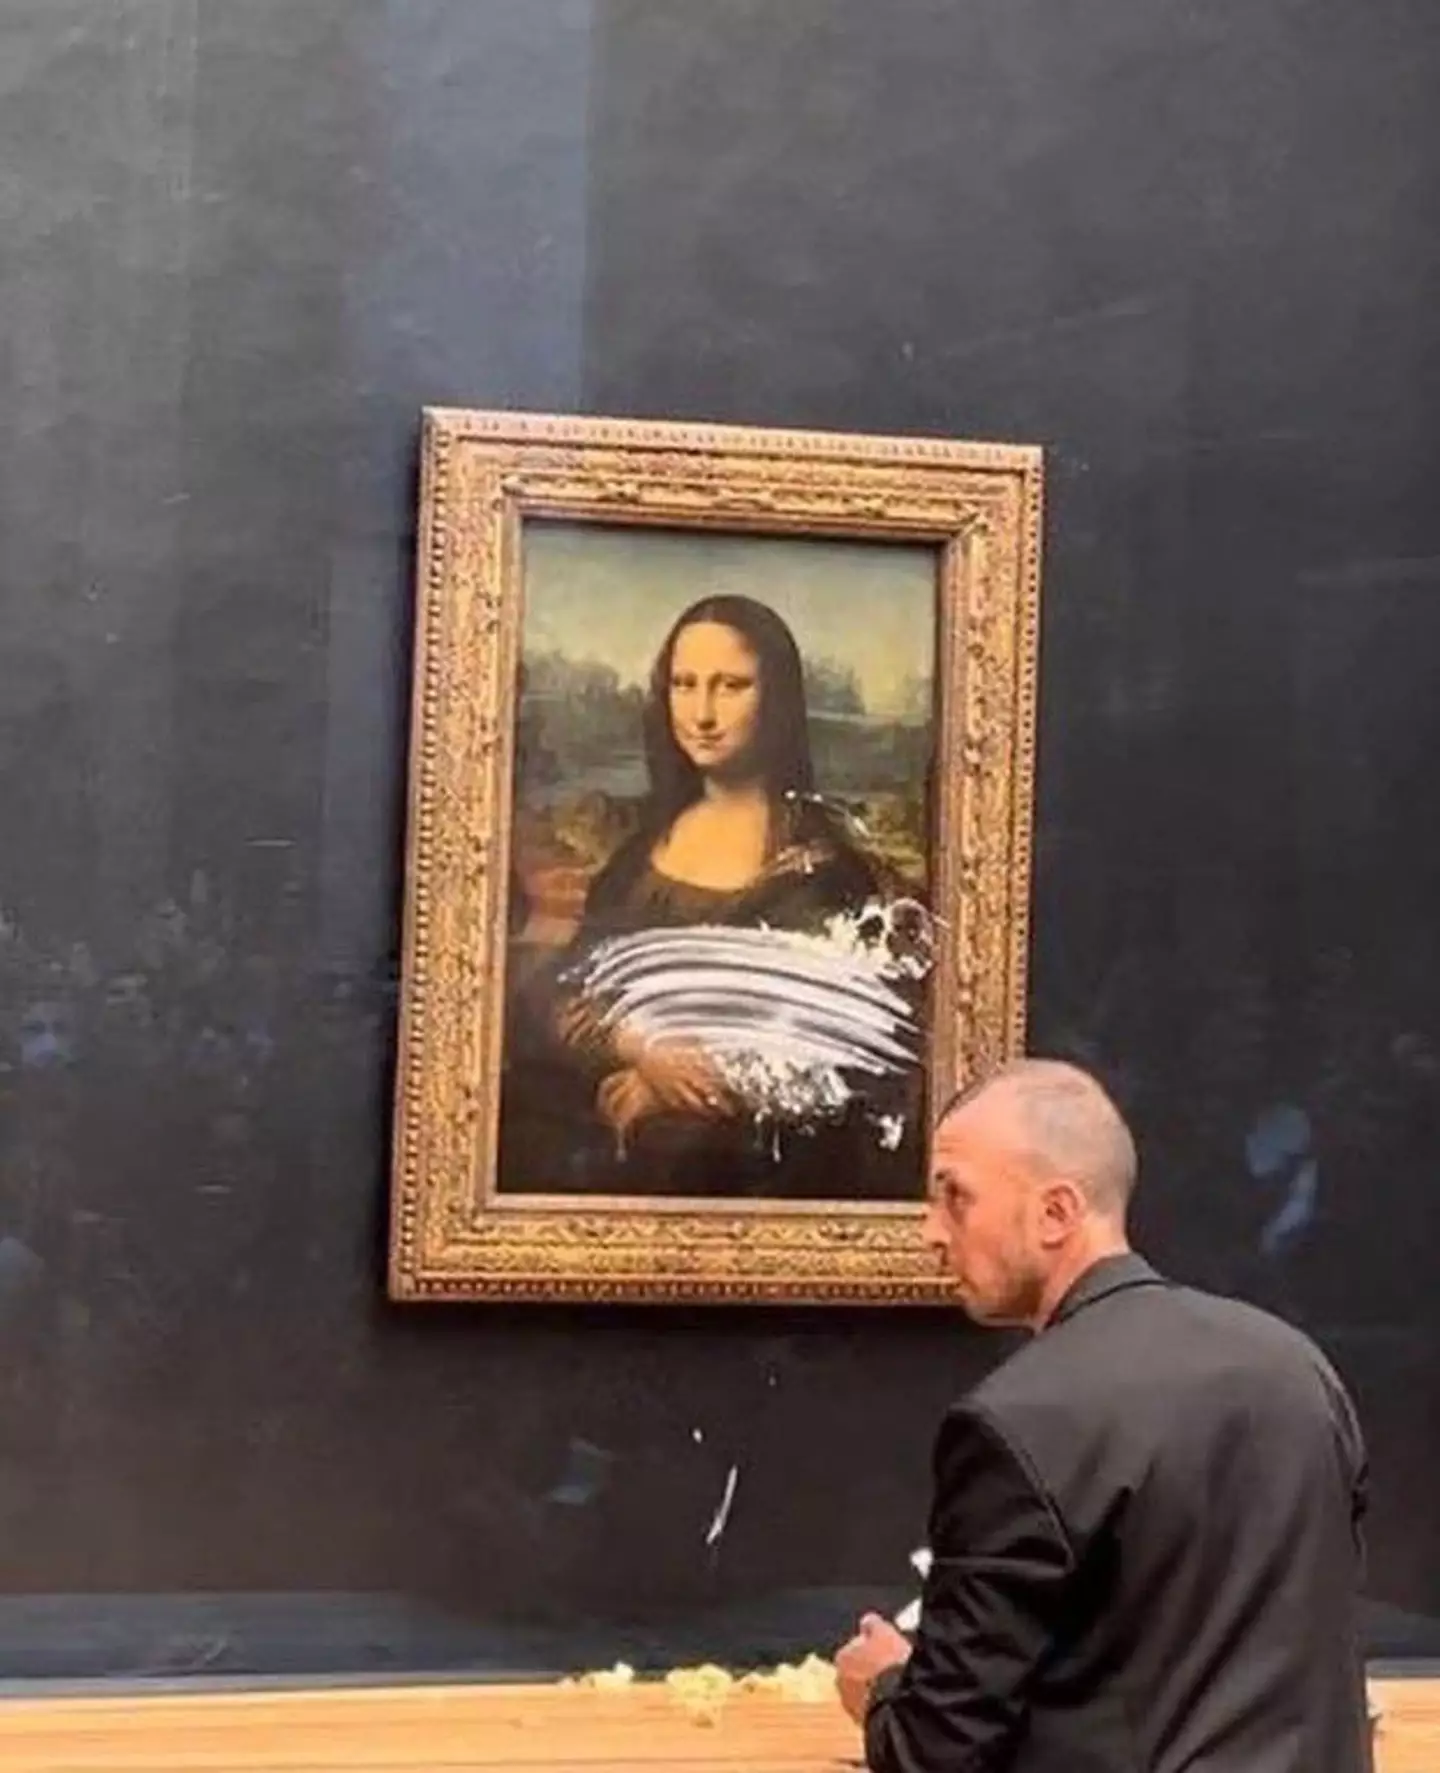 A man smeared cake over the Mona Lisa at the Louvre.